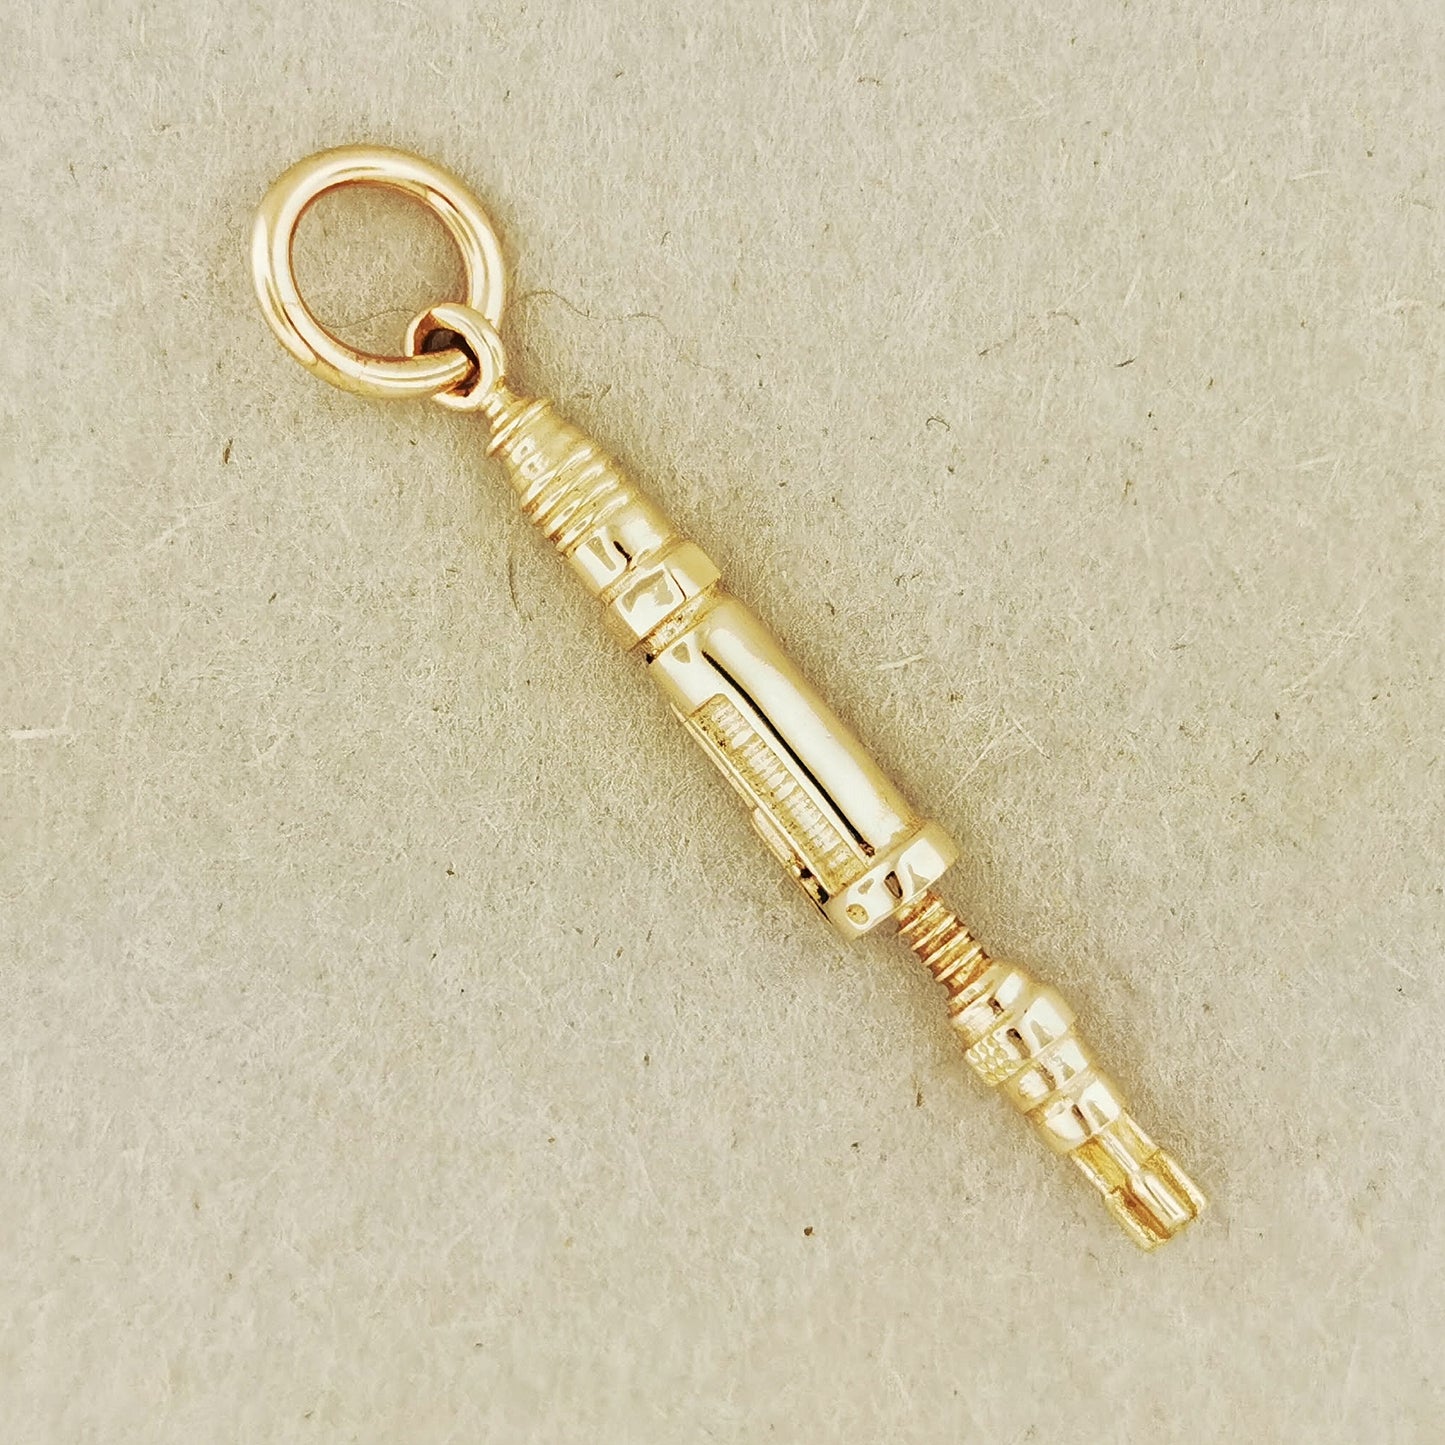 Dr. Who Sonic Screwdriver Pendant in 925 Silver or Bronze, 10th Doctor Pendant Charm, Dr Who Jewellery, 10th Screwdriver Pendant Jewelry, Sonic Screwdriver Pendant, Dr Who Pendant, Bronze Screwdriver Pendant, Sci Fi Pendant, Dr Who Tardis Pendant